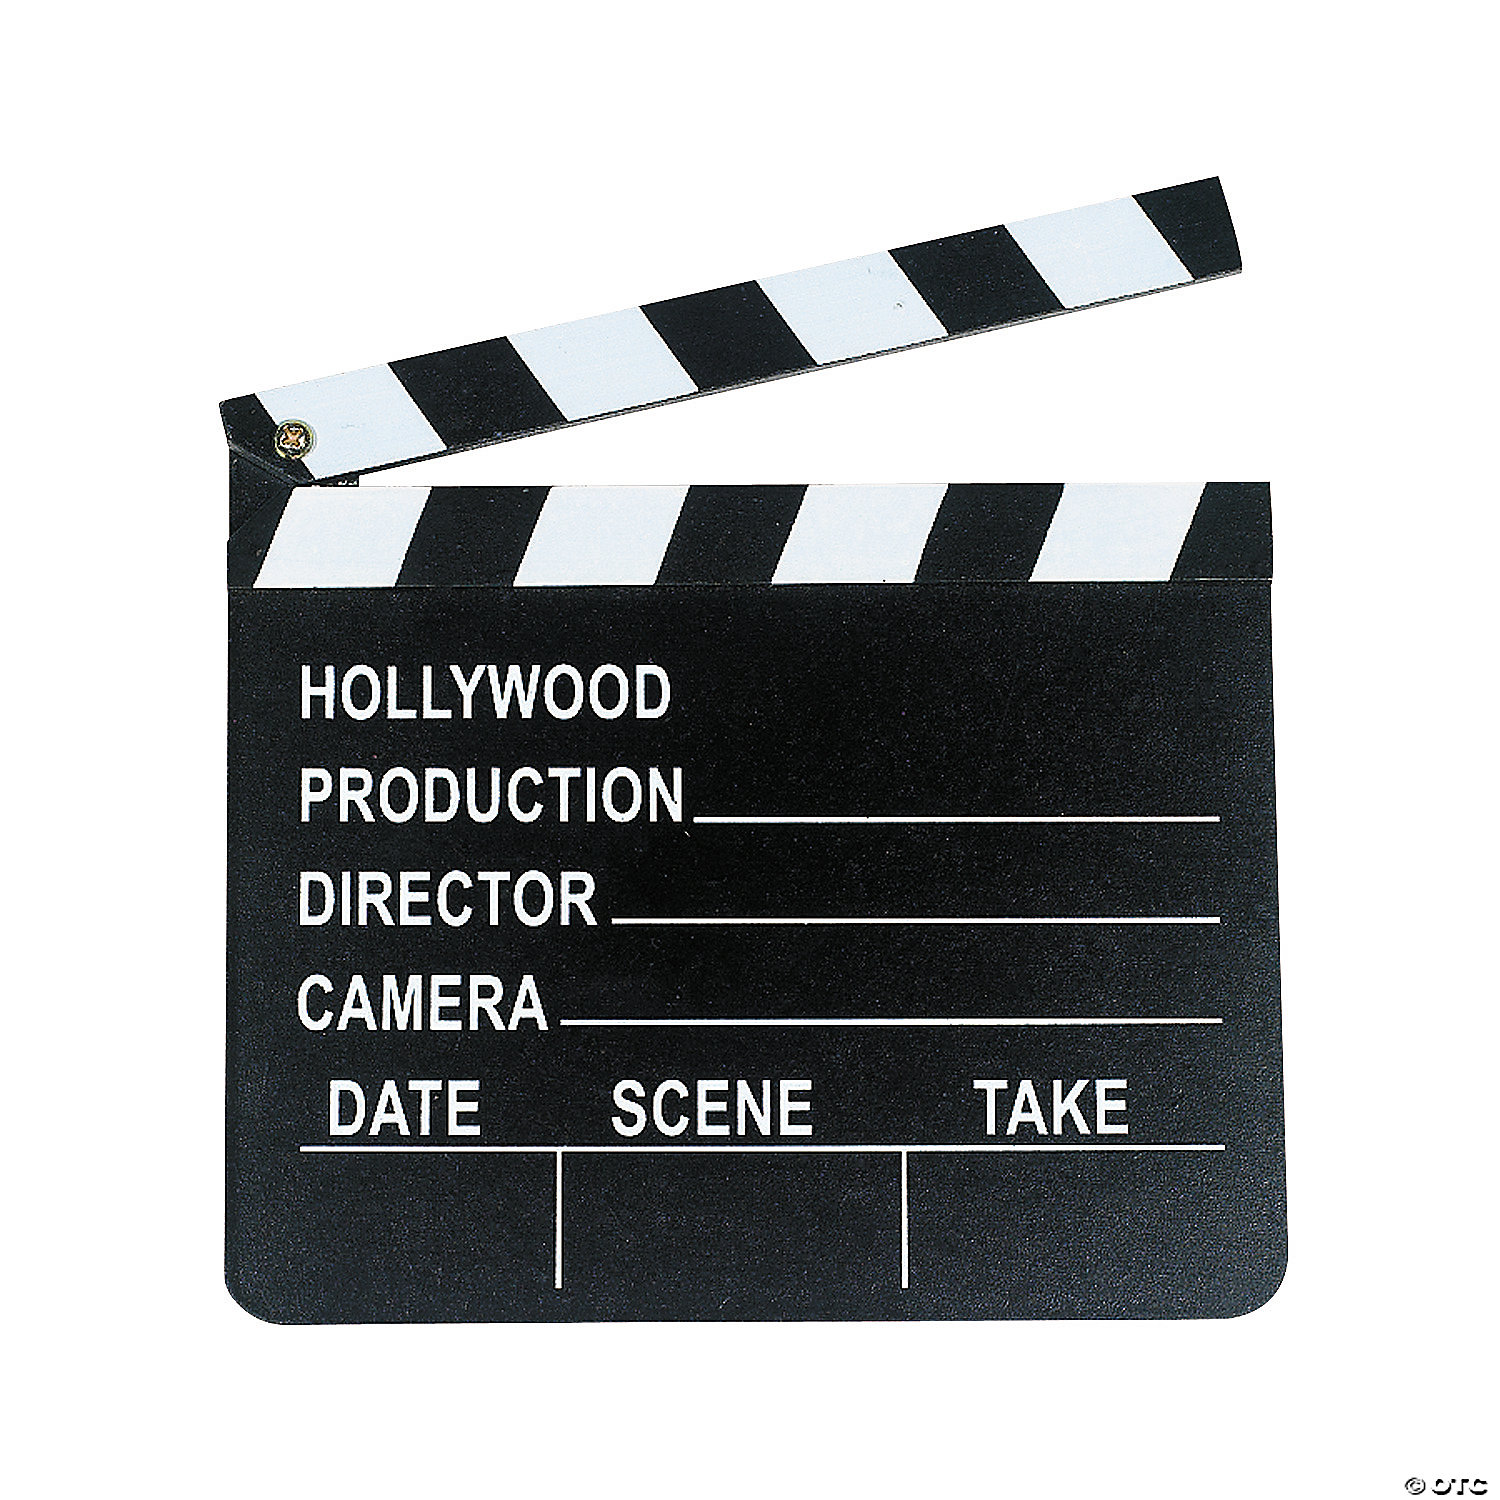 CALIFORNIA LOS ANGELES HOLLYWOOD Production Clapboard Keychain BLACK & RED 